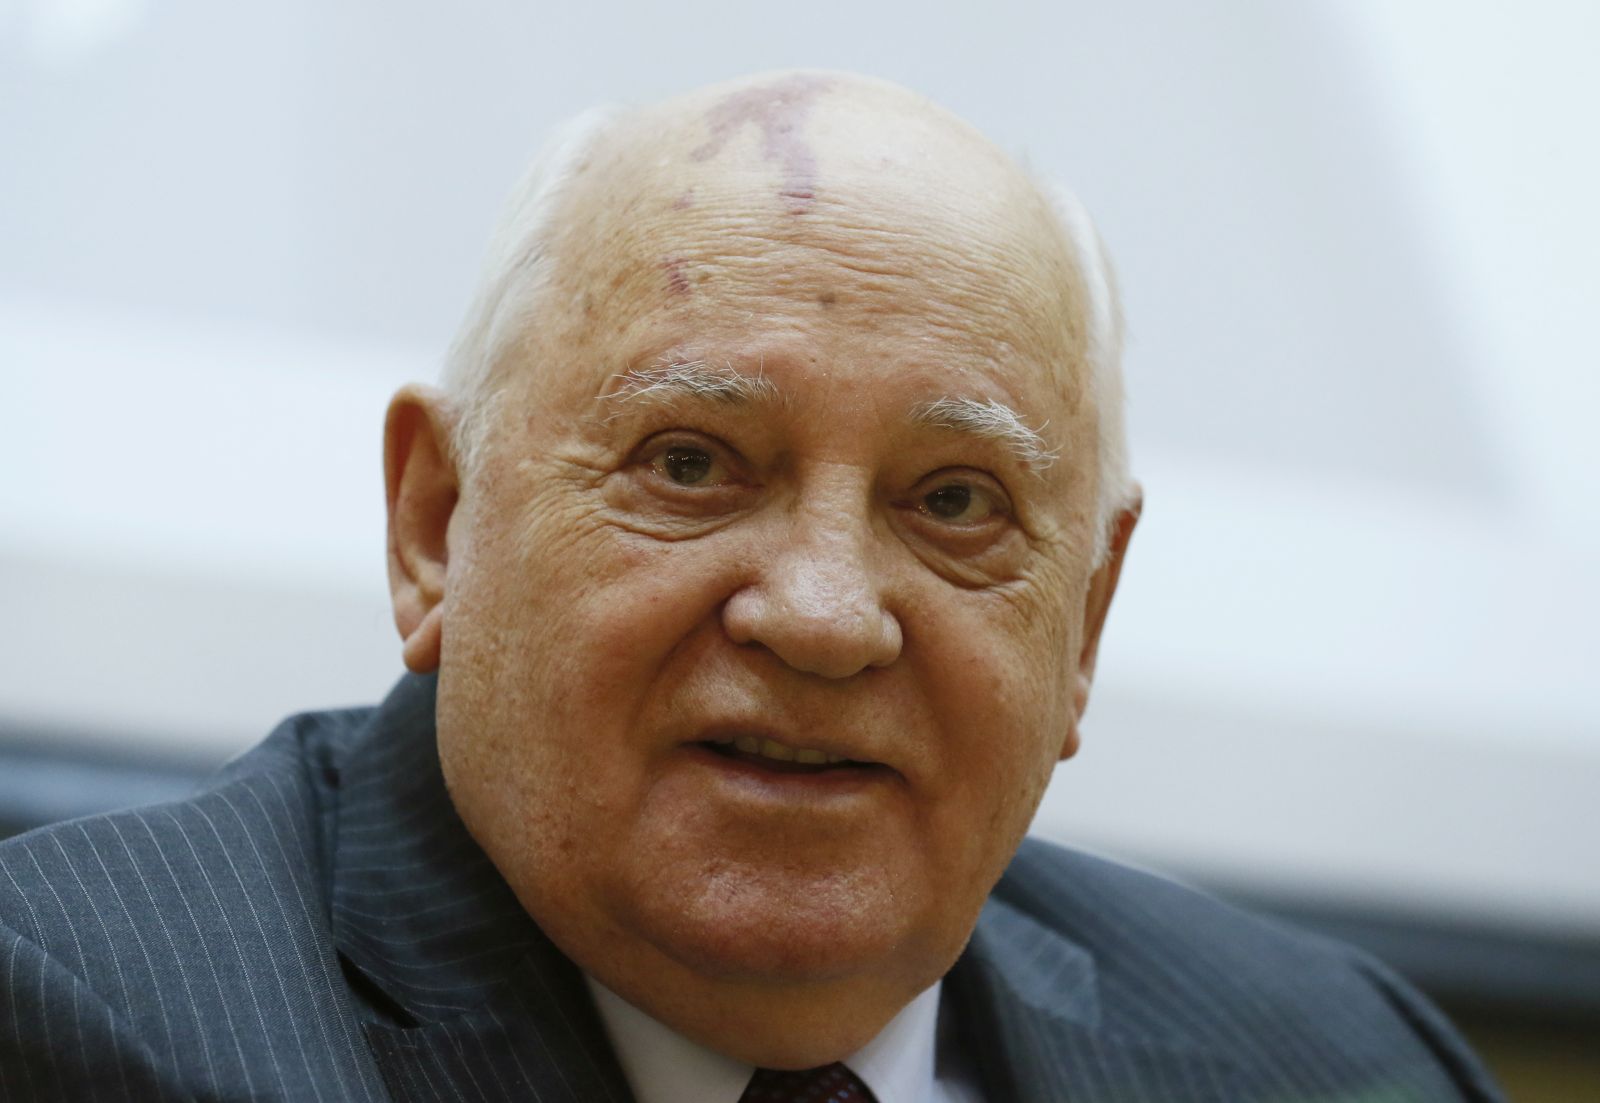 epa09046154 (FILE) Former Soviet leader Mikhail Gorbachev smiles during the presentation of a new book titled 'Gorbachev in life', published by the Gorbachev Fund in Moscow, Russia, 29 February 2016 (reisued 02 March 2021). Mikhail Gorbachev, the eighth and last leader of the then Soviet Union, is celebrating his 90th birthday on 02 March 2021.  EPA/SERGEI ILNITSKY